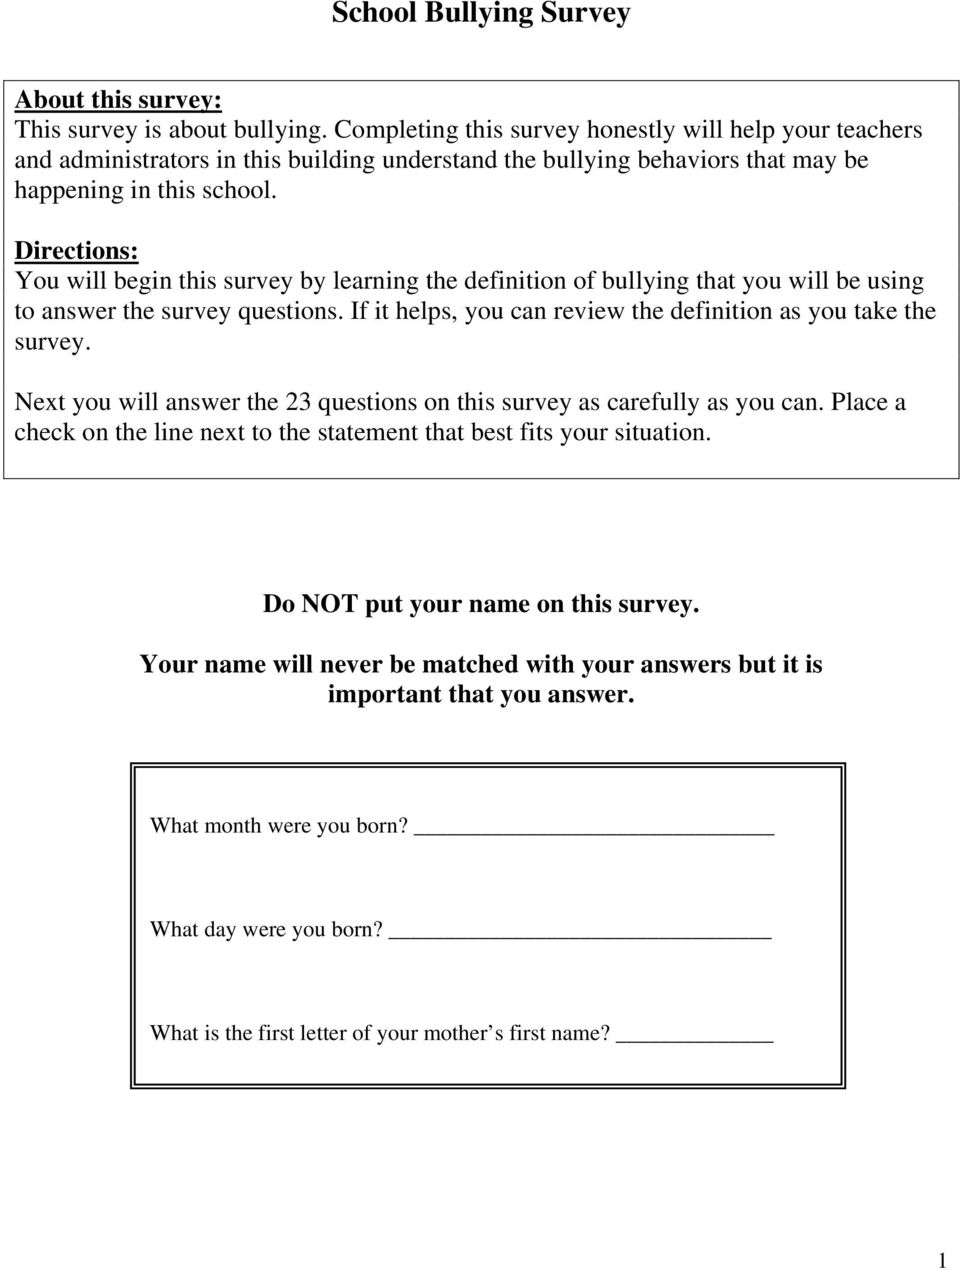 Directions: You will begin this survey by learning the definition of bullying that you will be using to answer the survey questions. If it helps, you can review the definition as you take the survey.